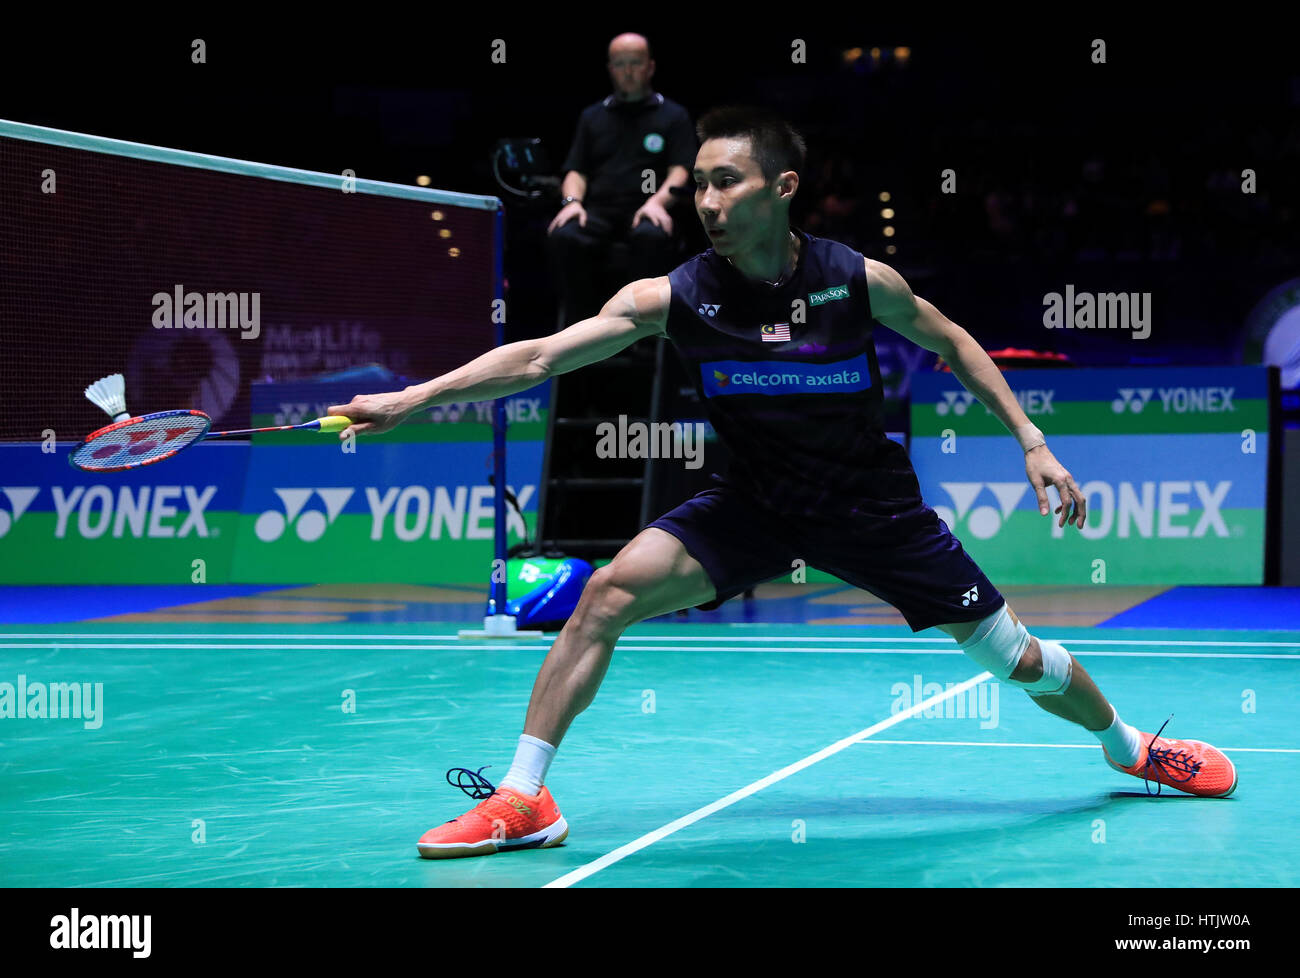 Malaysia's Chong Wei Lee against China's Yuqi Shi in the Men's Singles Final during day six of the YONEX All England Open Badminton Championships at the Barclaycard Arena, Birmingham. Stock Photo